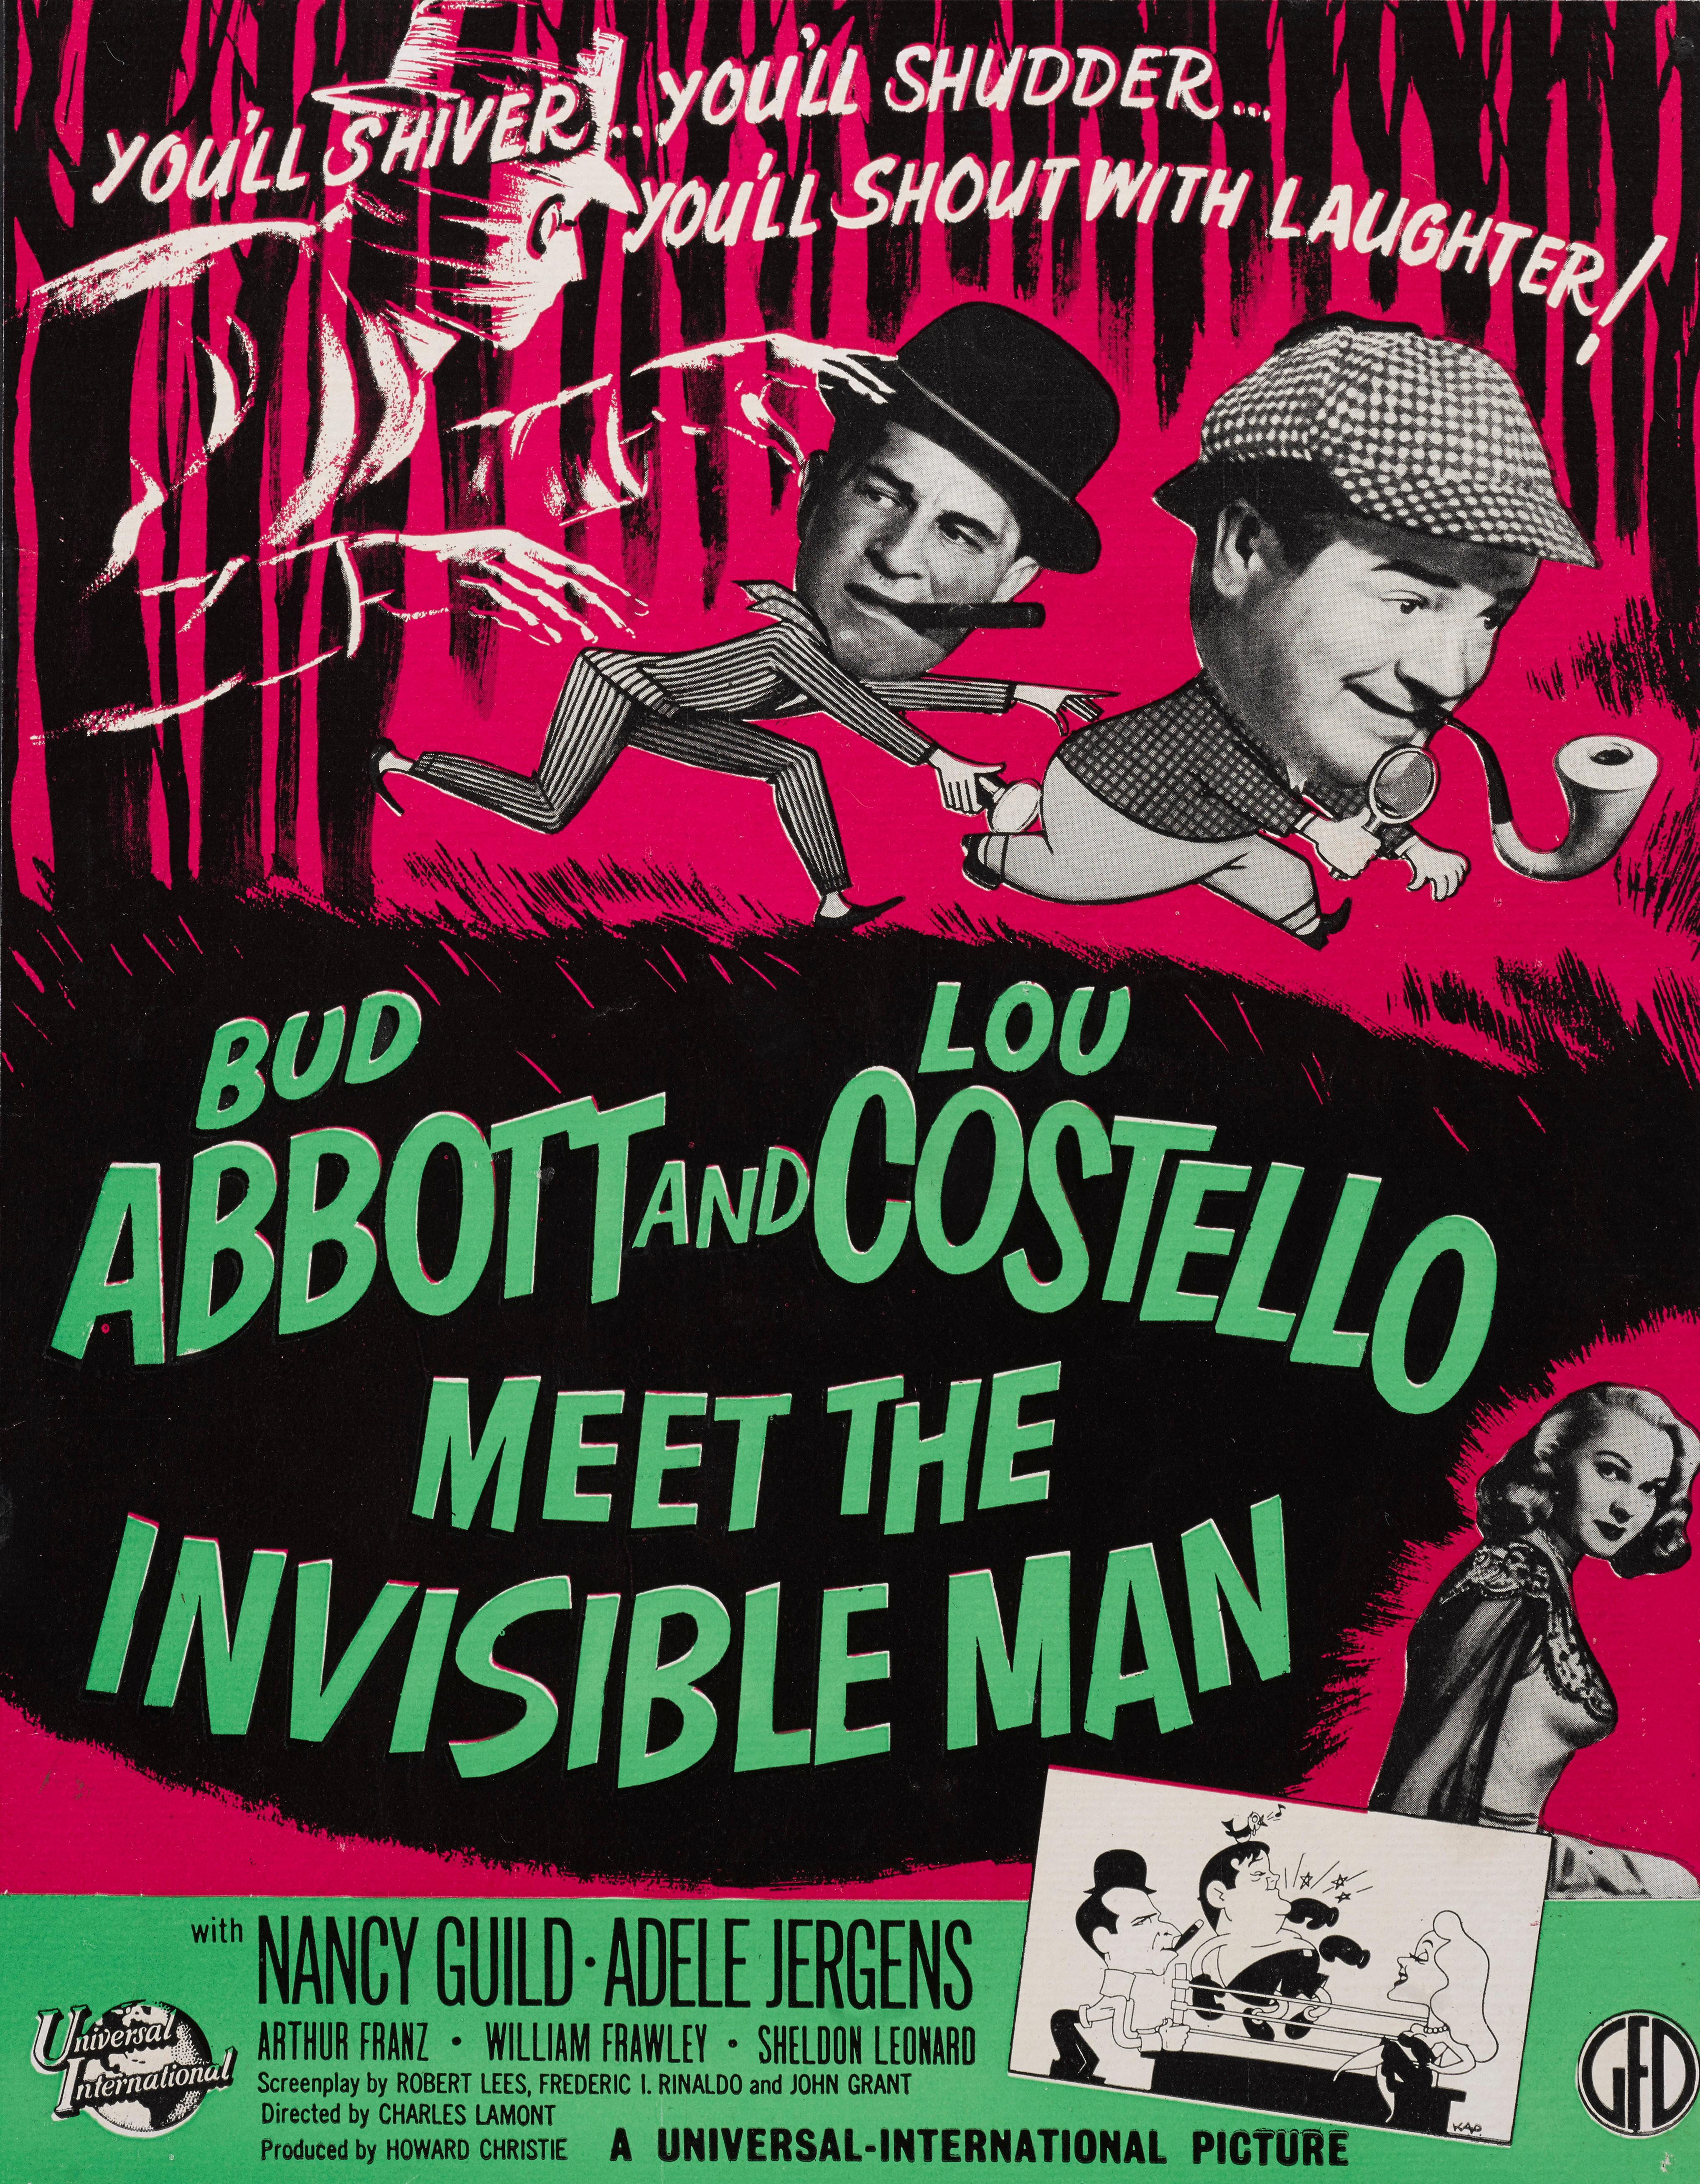 Original British trade advertisement for the 1951 Comedy, Horror Abbott and Costello Meet the Killer, Boris Karloff.
The film was directed by Charles Lamont and stared Bud Abbott, Lou Costello.
The piece is conservation paper backed and would be